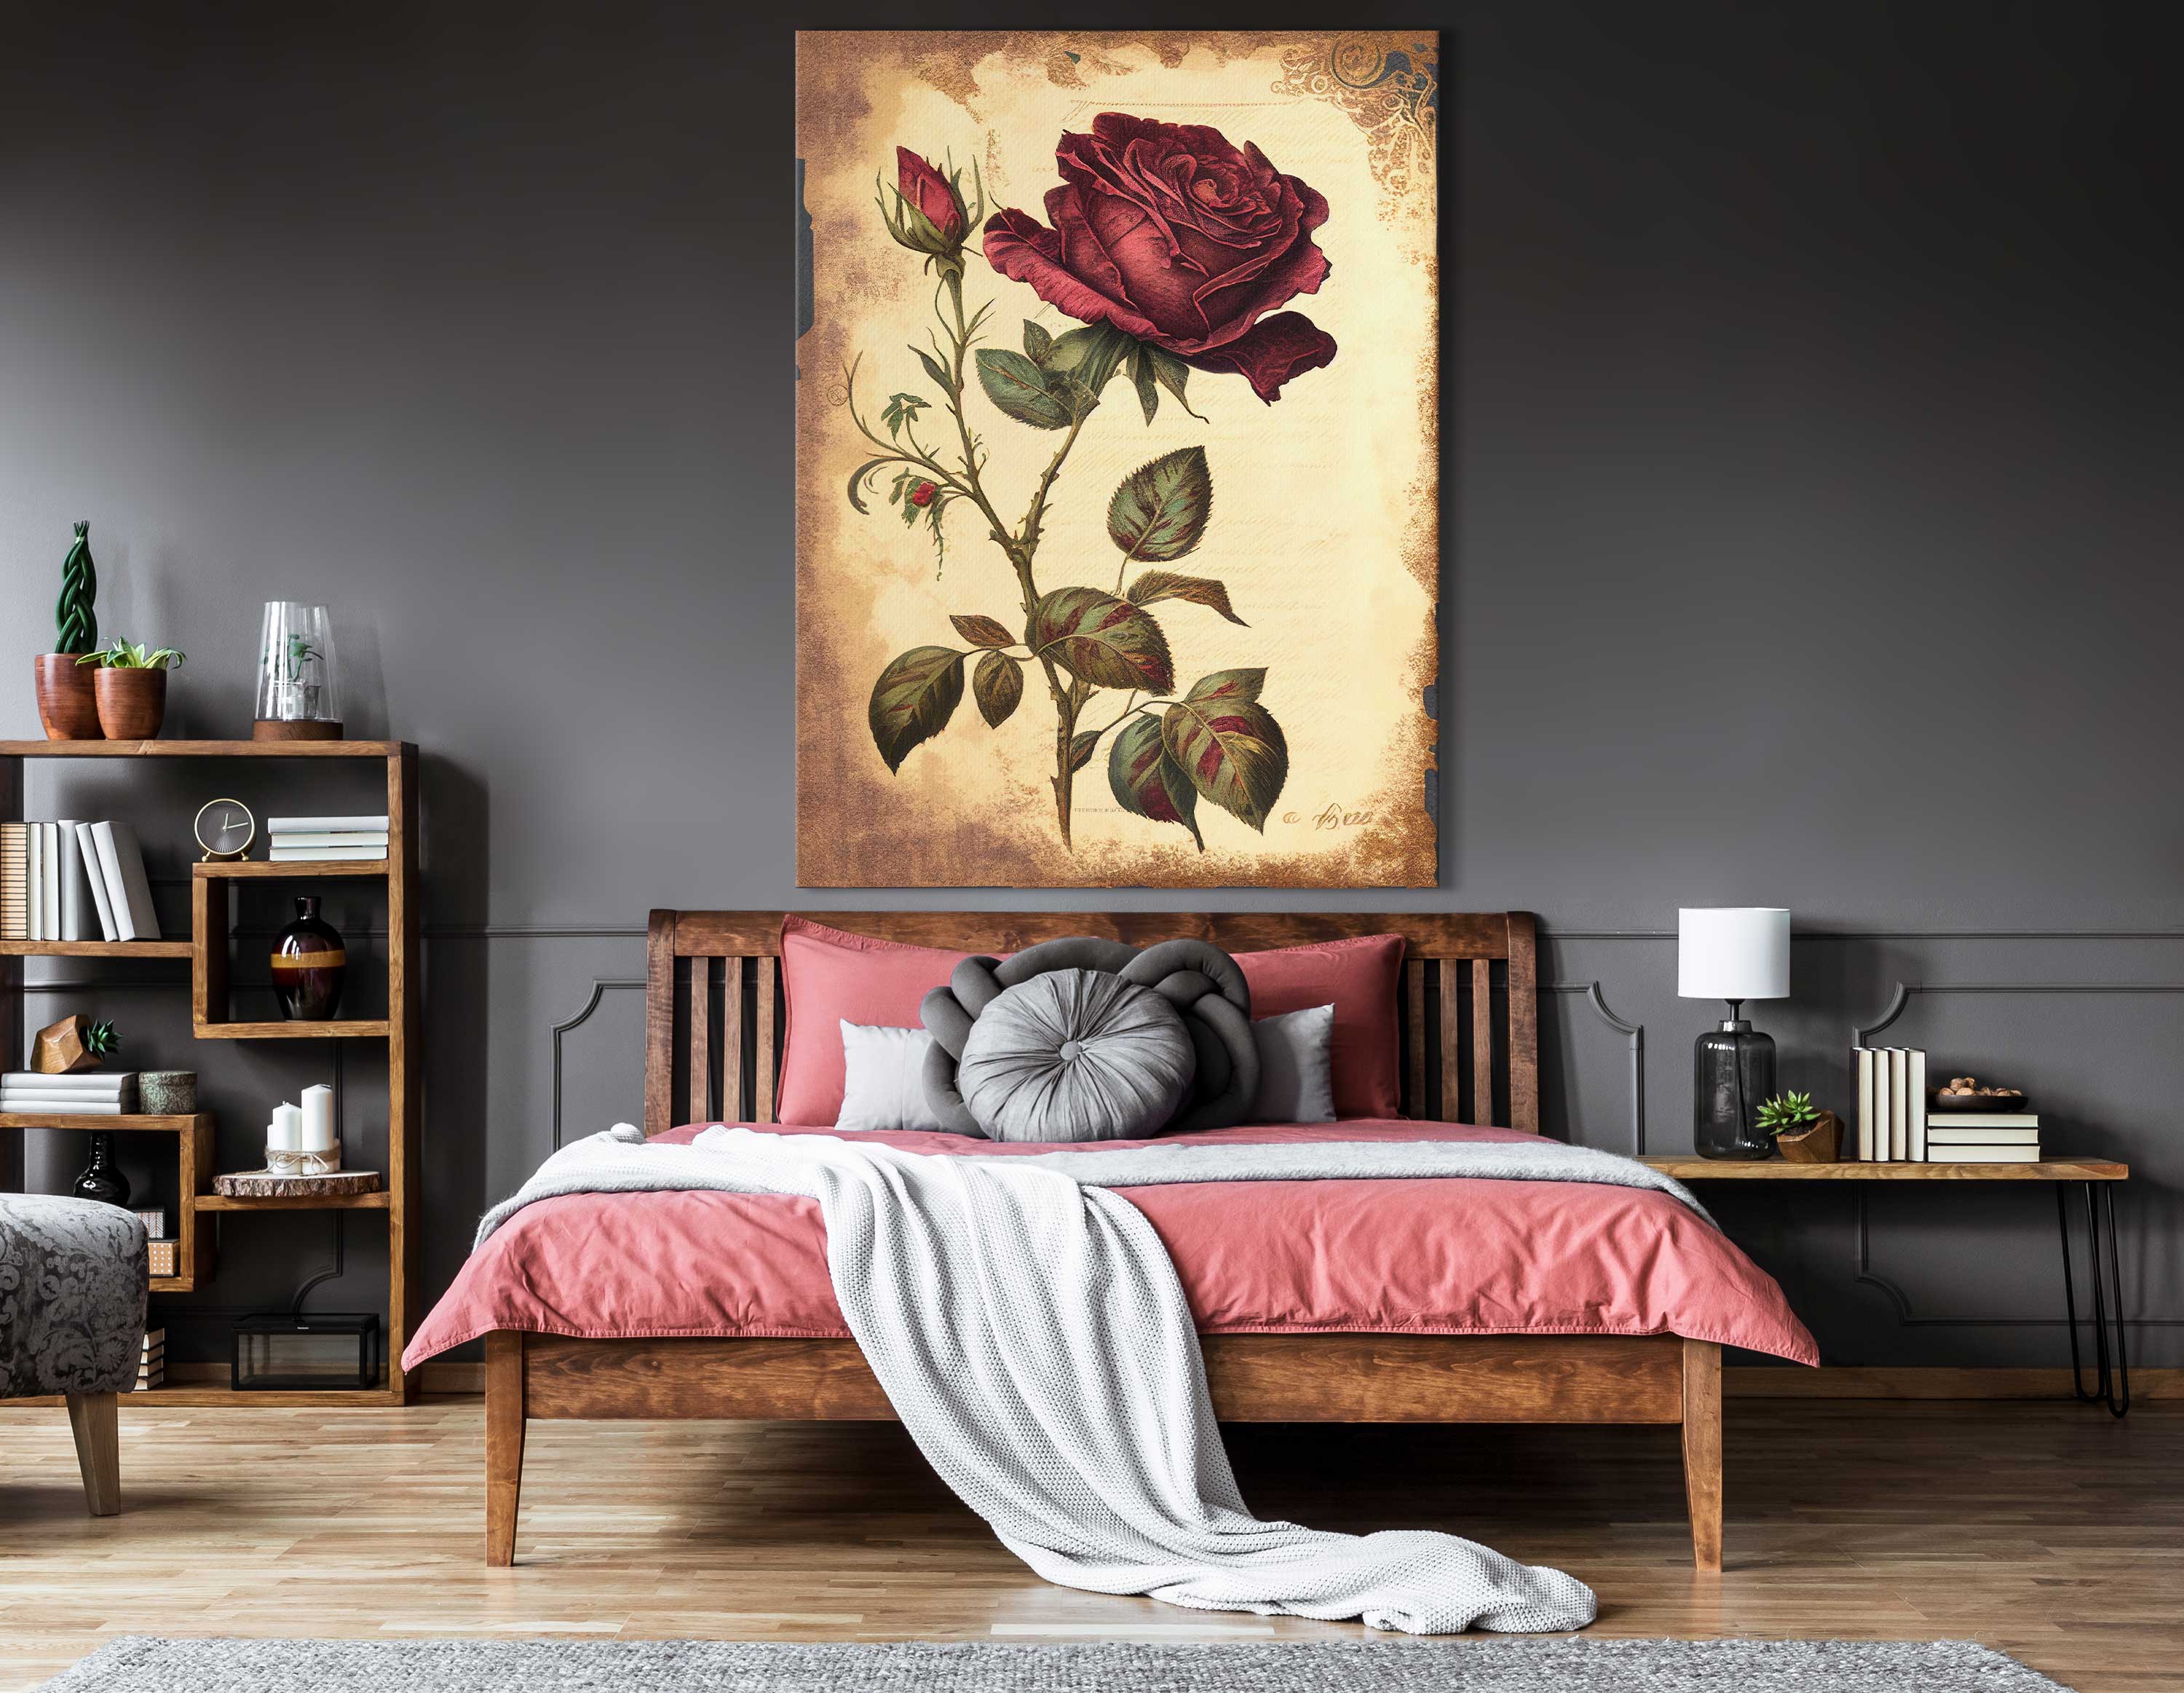 Traditional Rose with Ornate Design Canvas Art